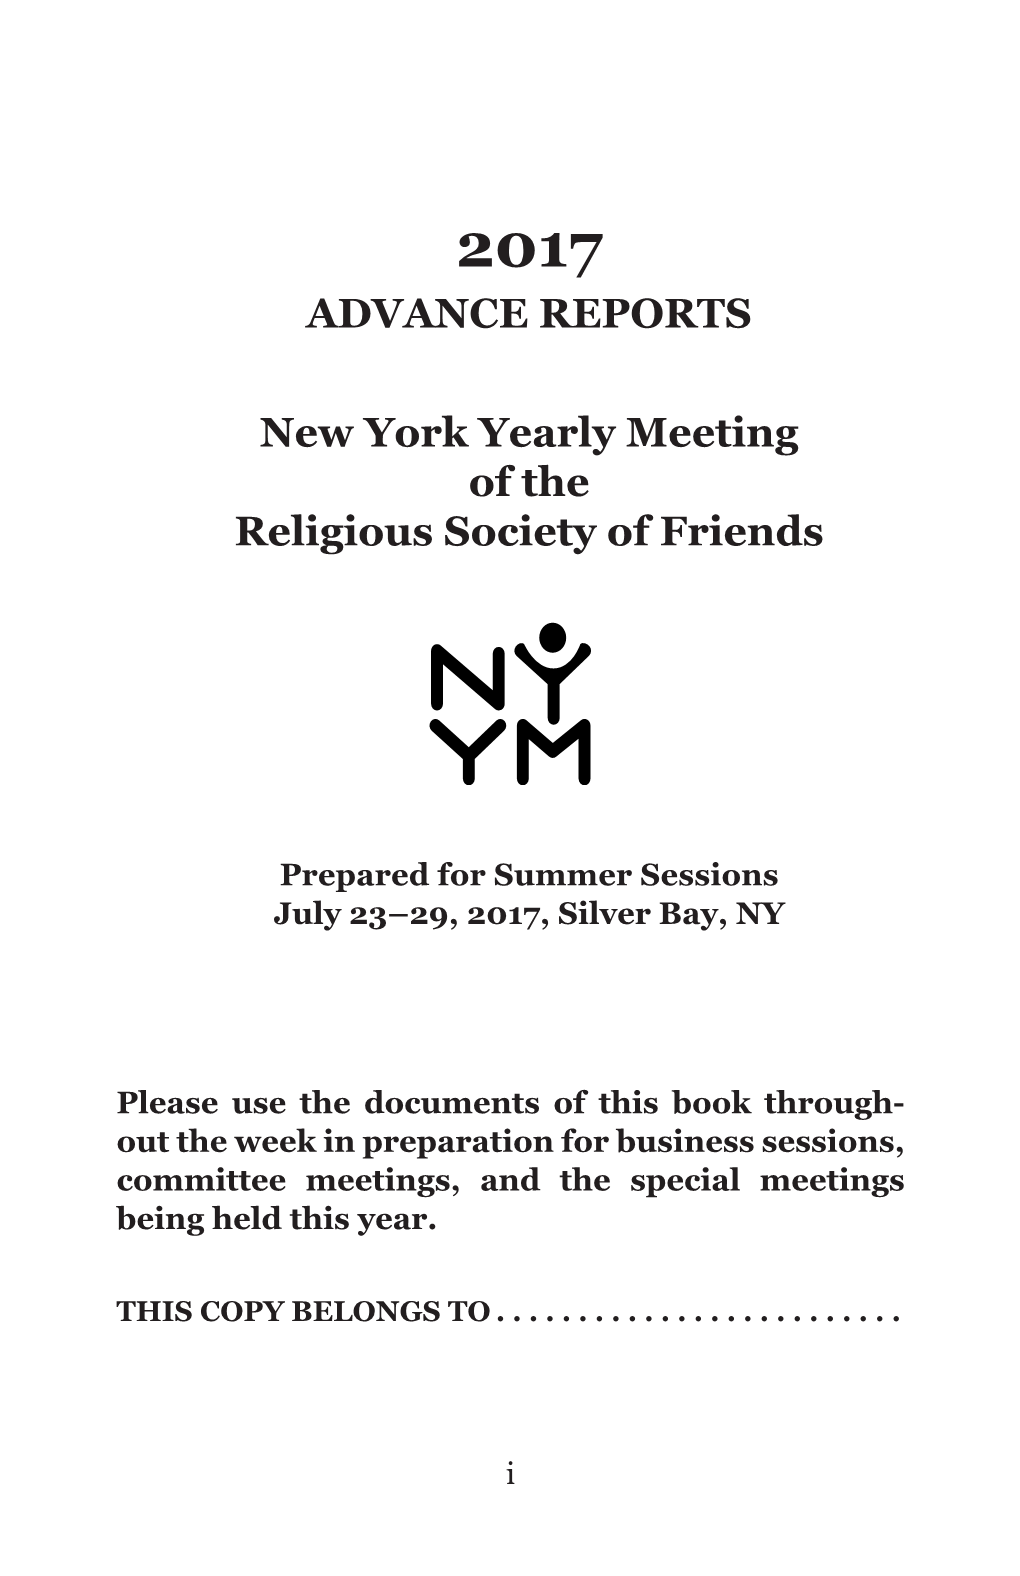 ADVANCE REPORTS New York Yearly Meeting of the Religious